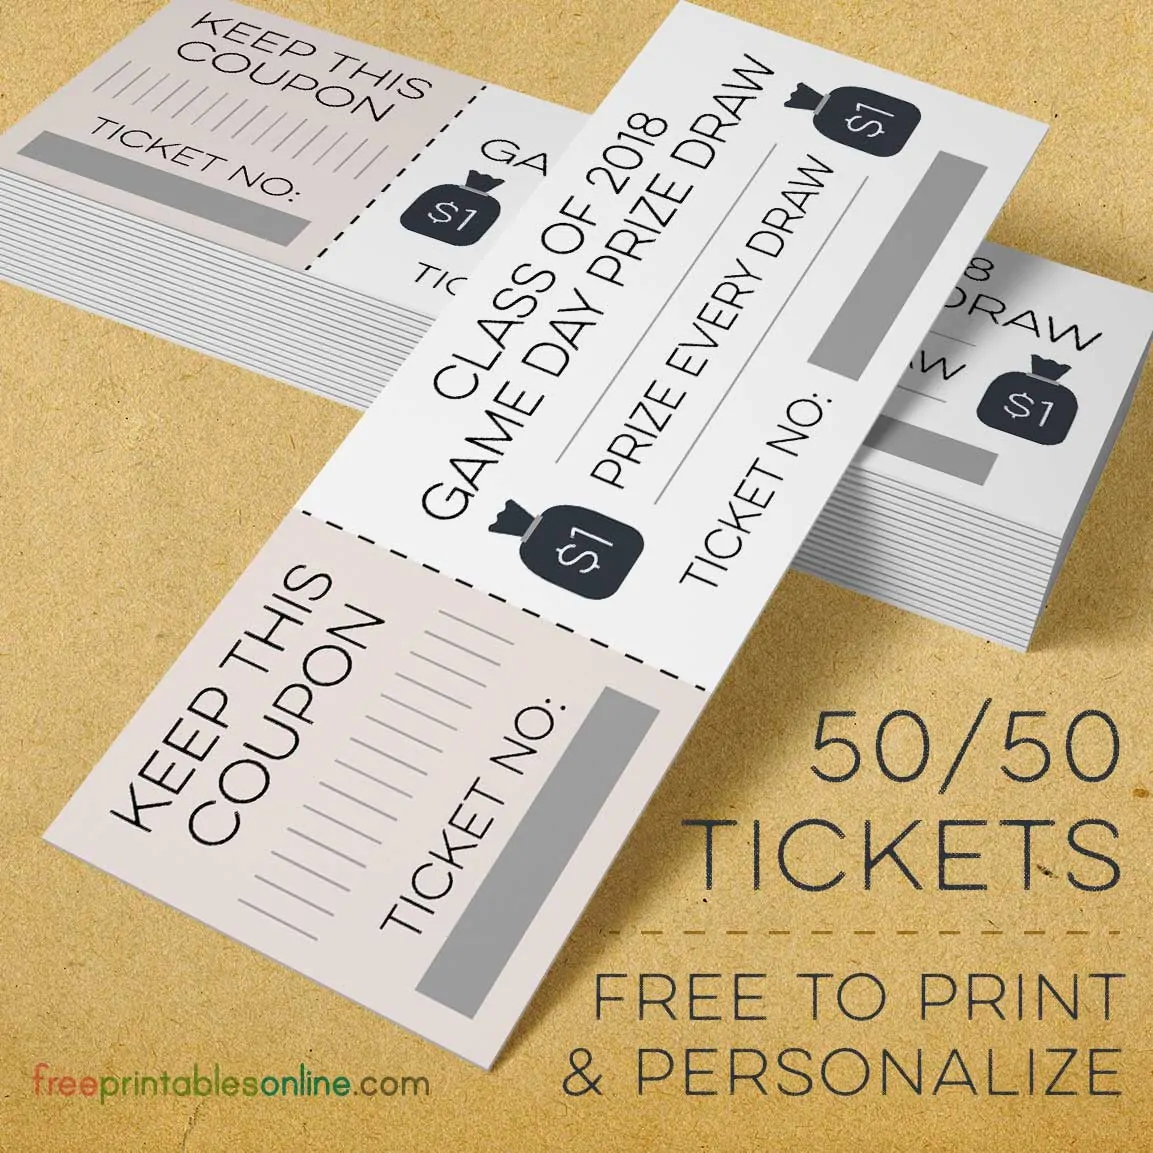 Moneybags 50 50 Raffle Tickets Free Printables Online